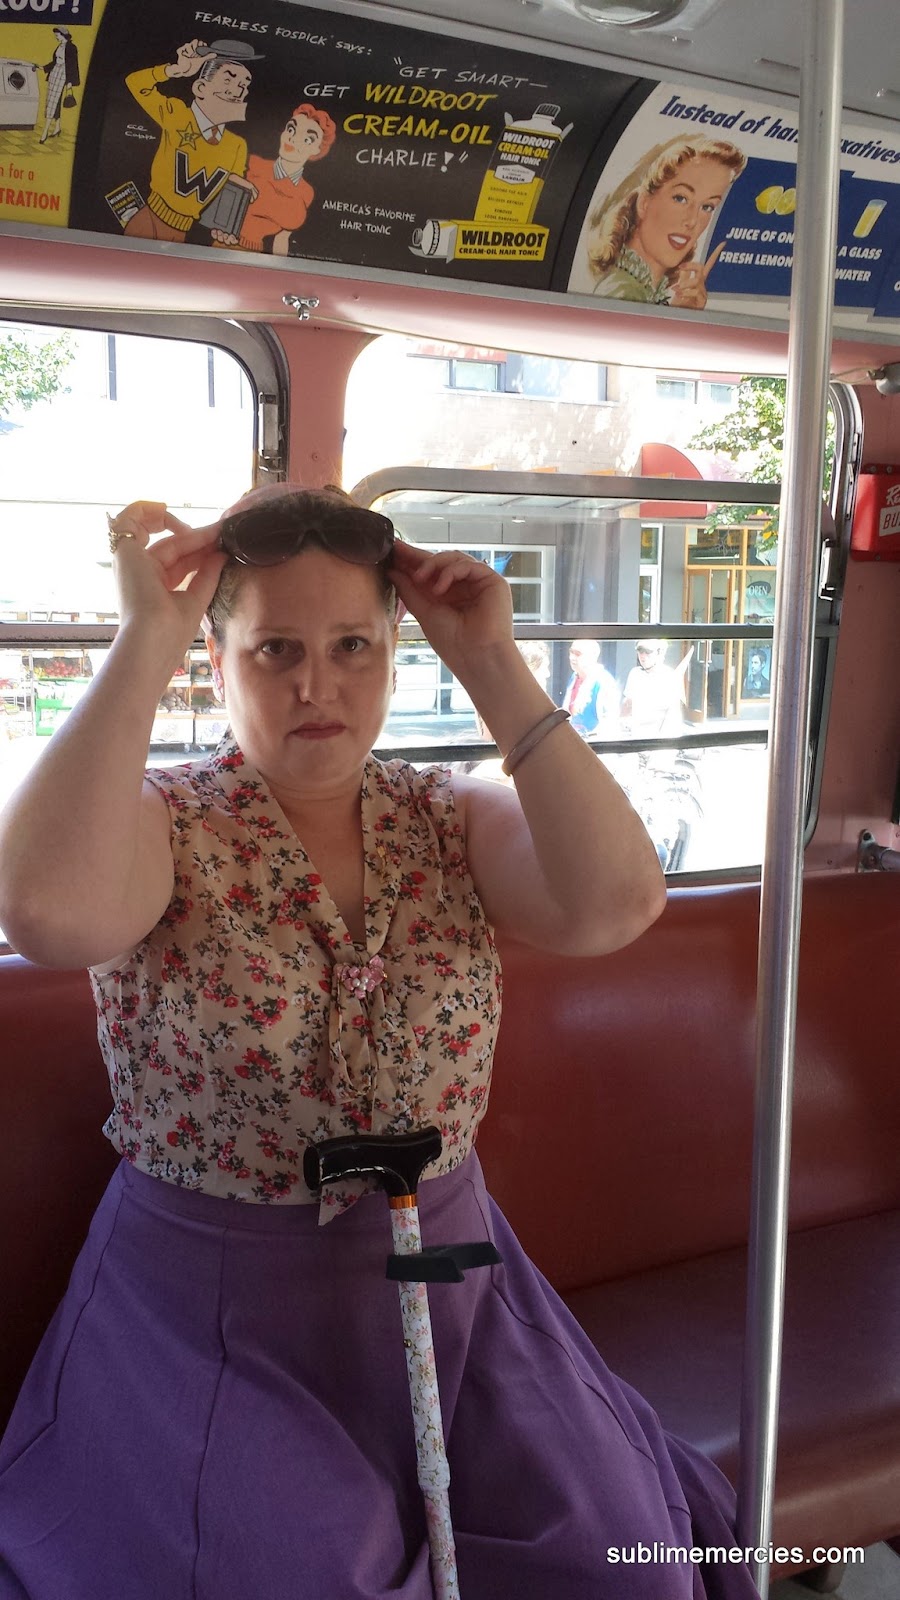 Sublime Mercies What Would Rosa Parks Do? Facing Online Haters with Style photo